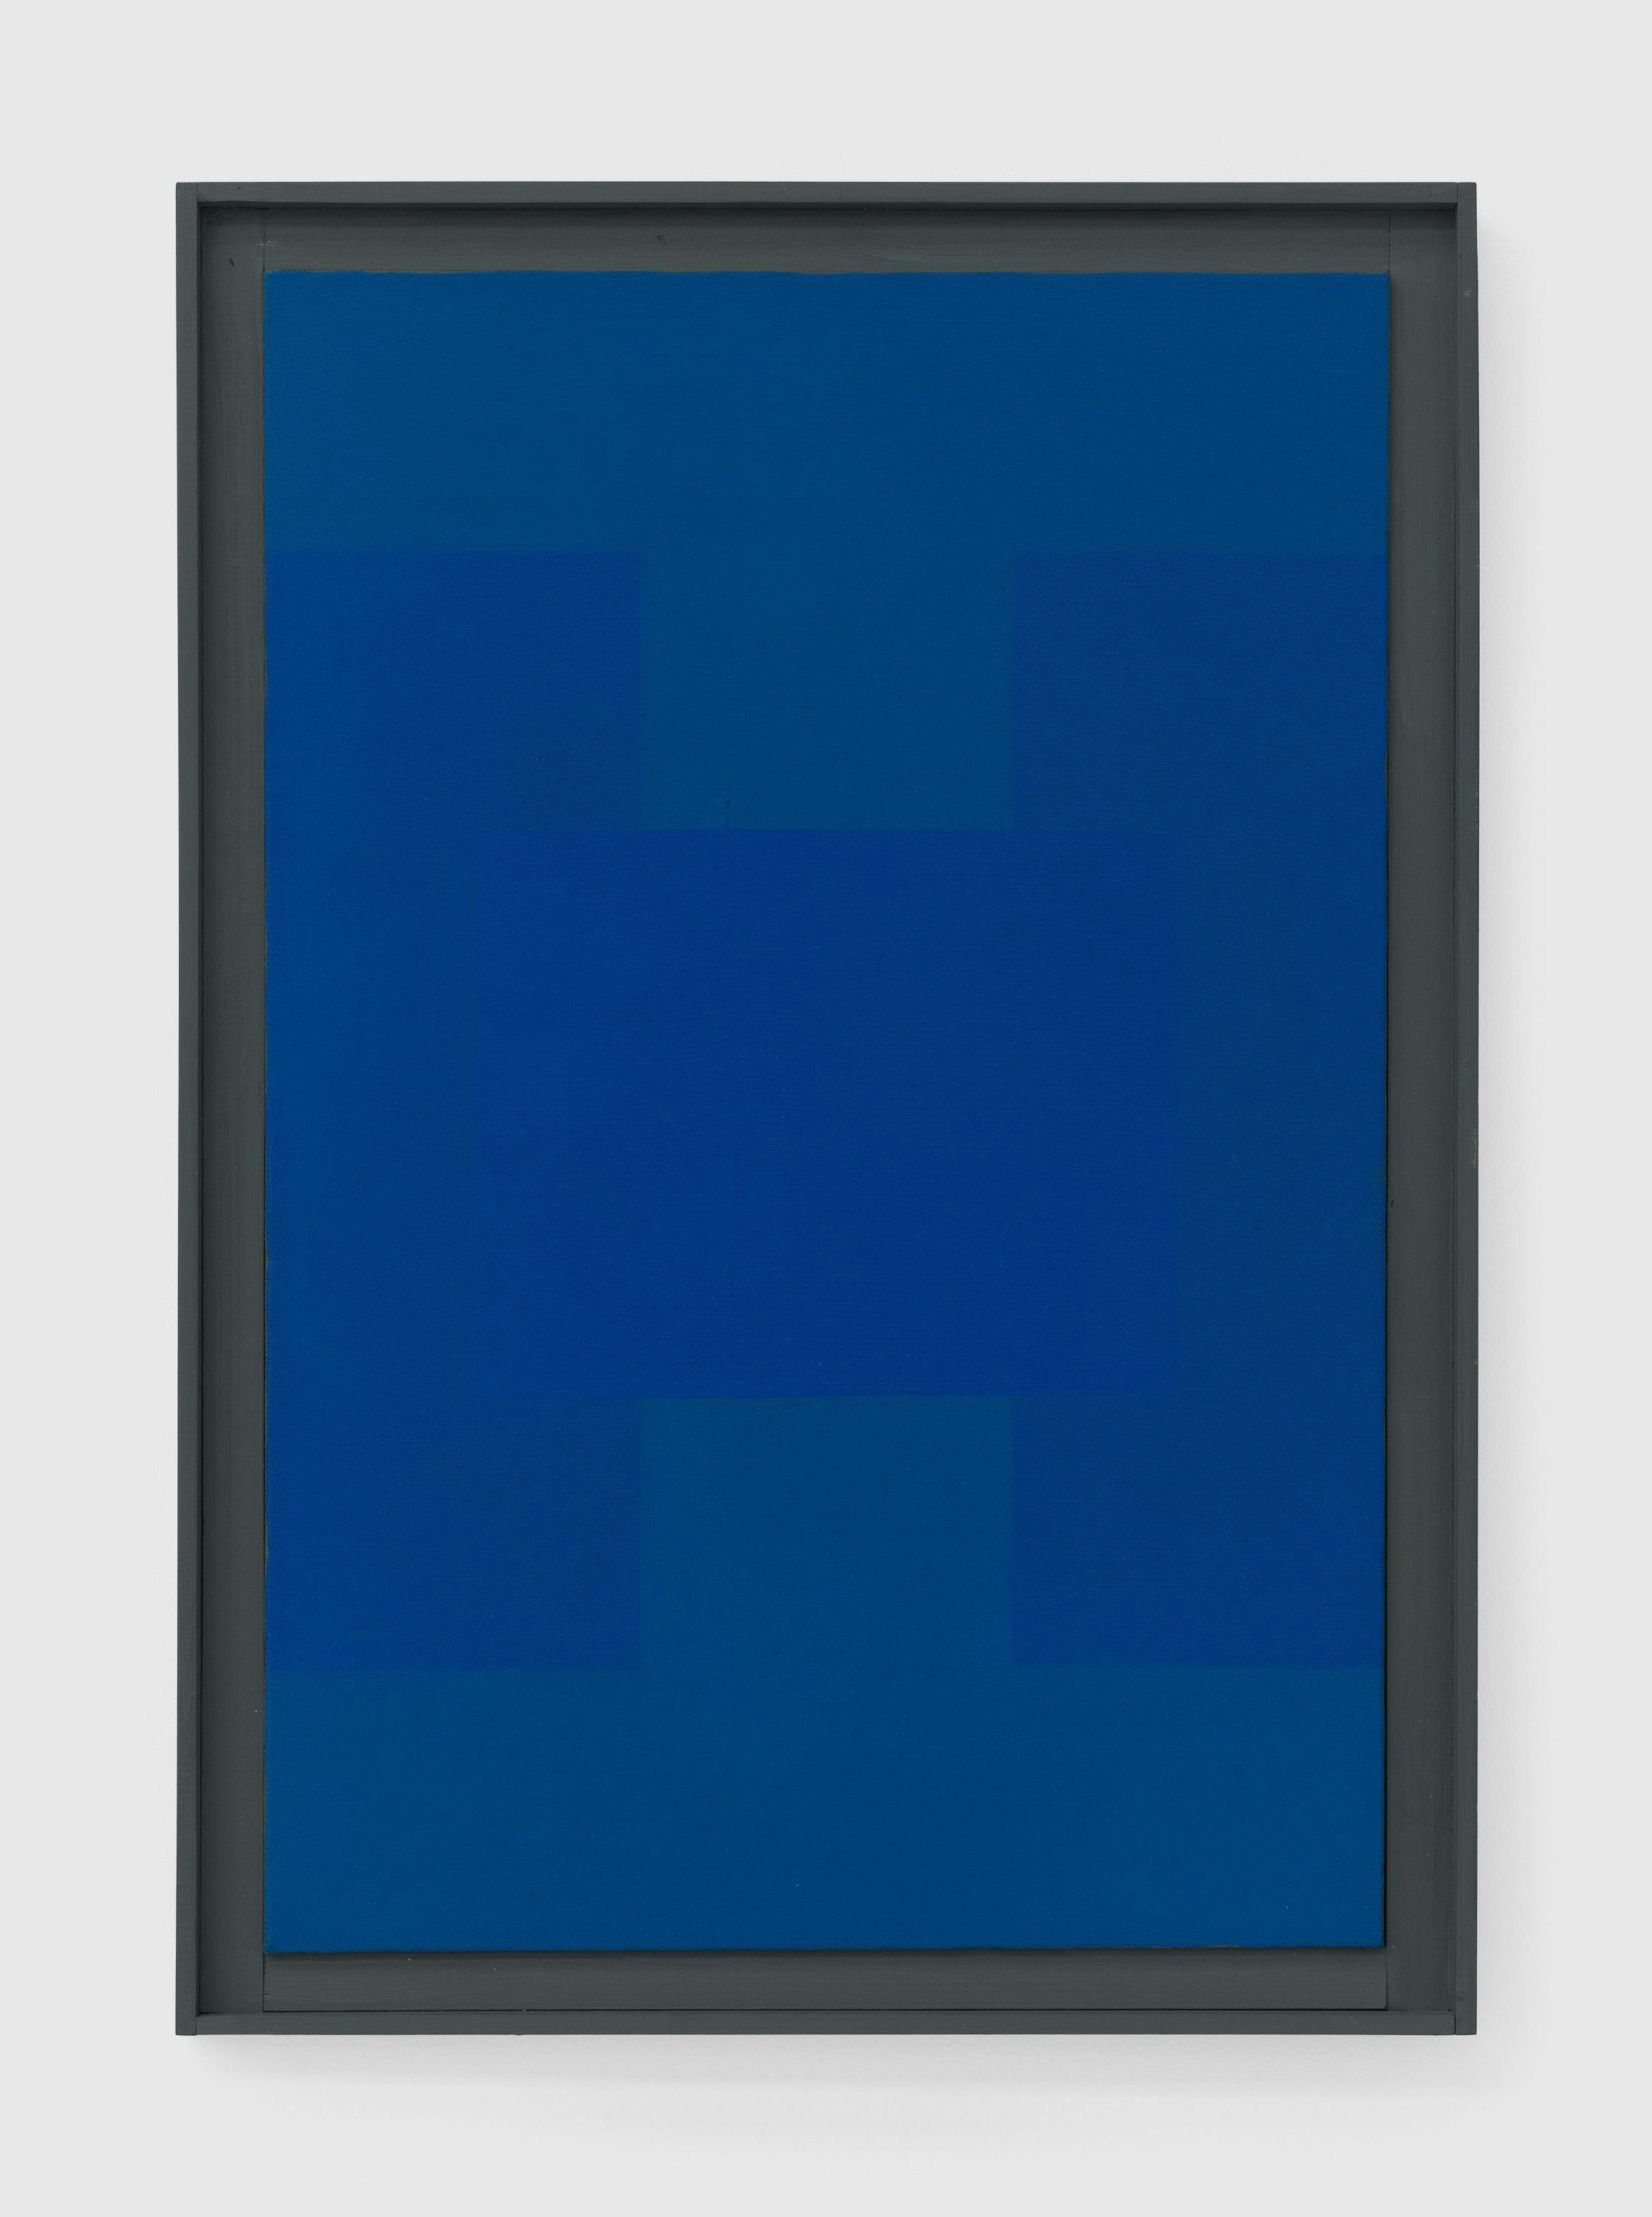 A painting by Ad Reinhardt, titled Blue Painting, dated 1953.